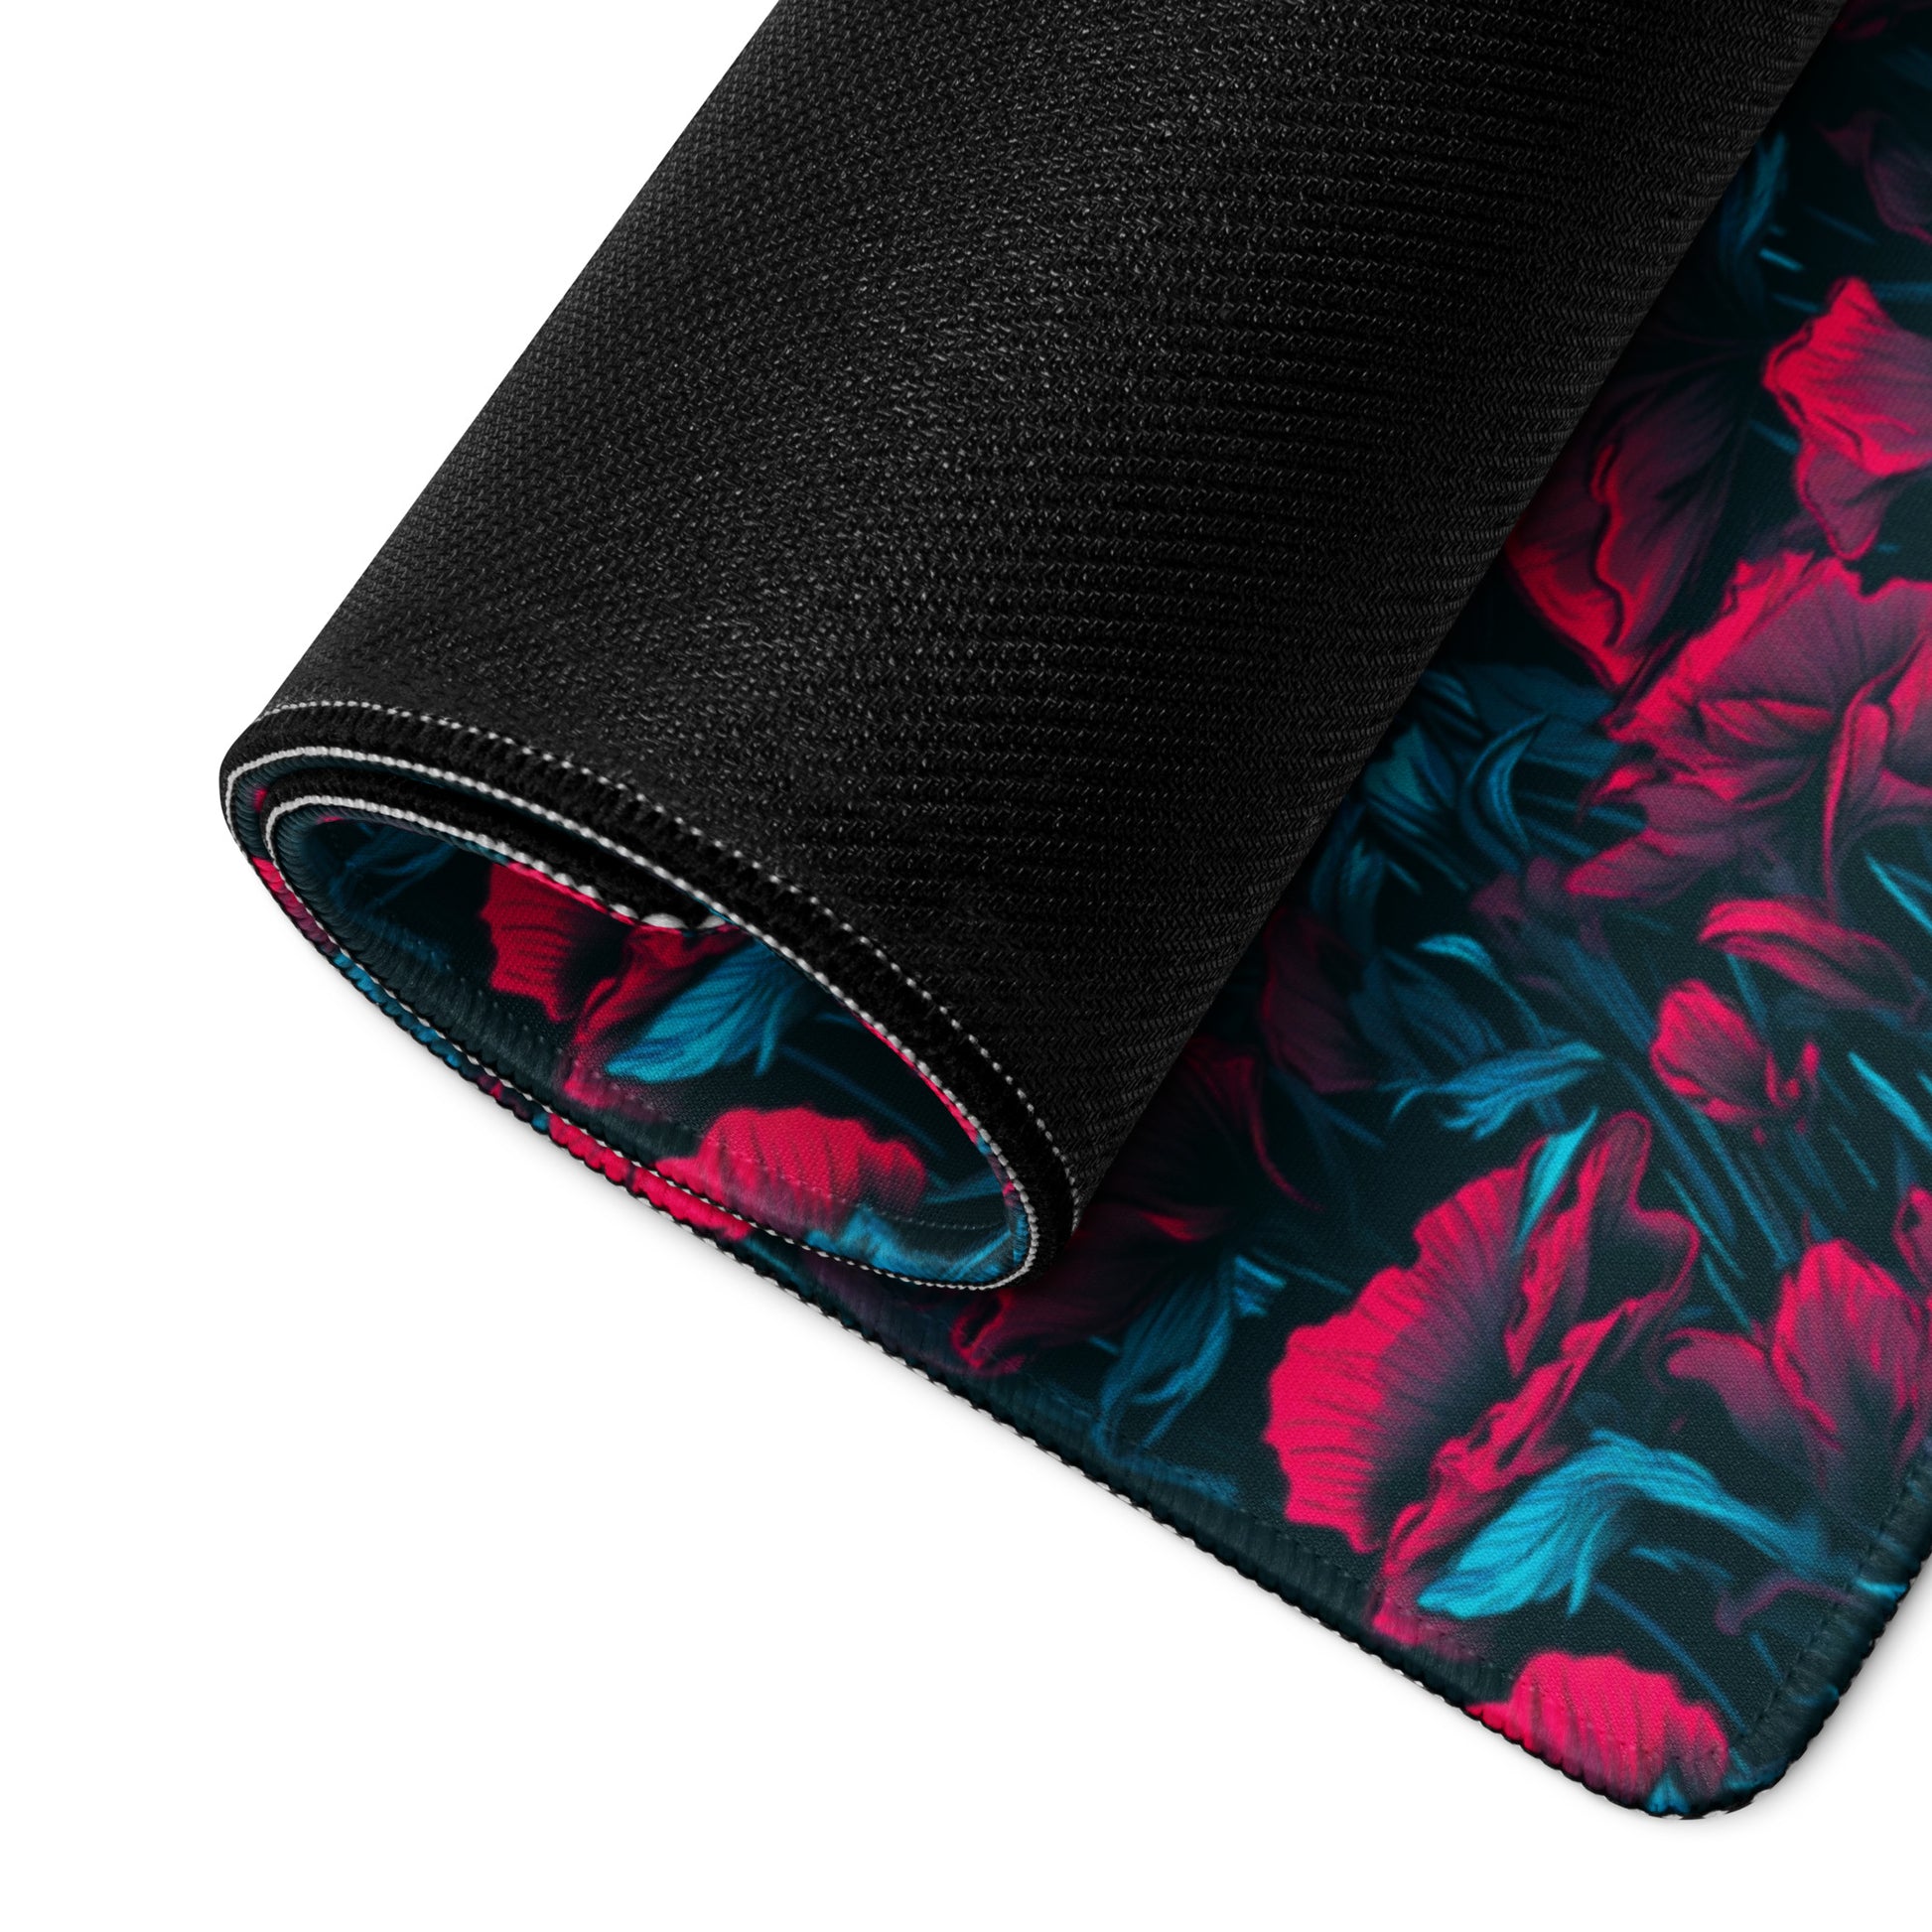 A 36" x 18" desk pad with a red and blue floral pattern rolled up.